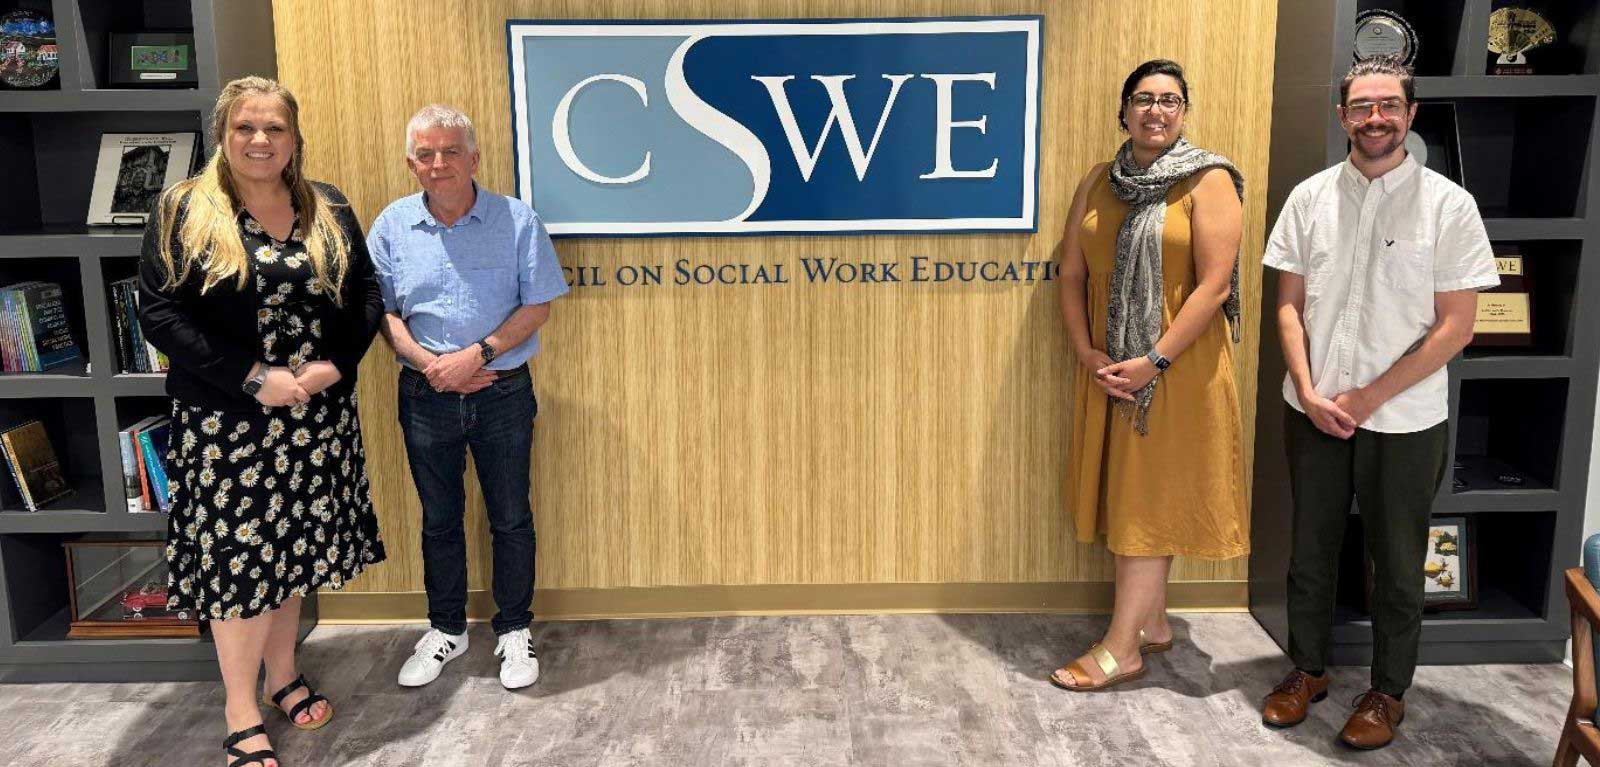 two men and two woman standing in front of a wood-panelled wall with the CSWE logo mounted on it